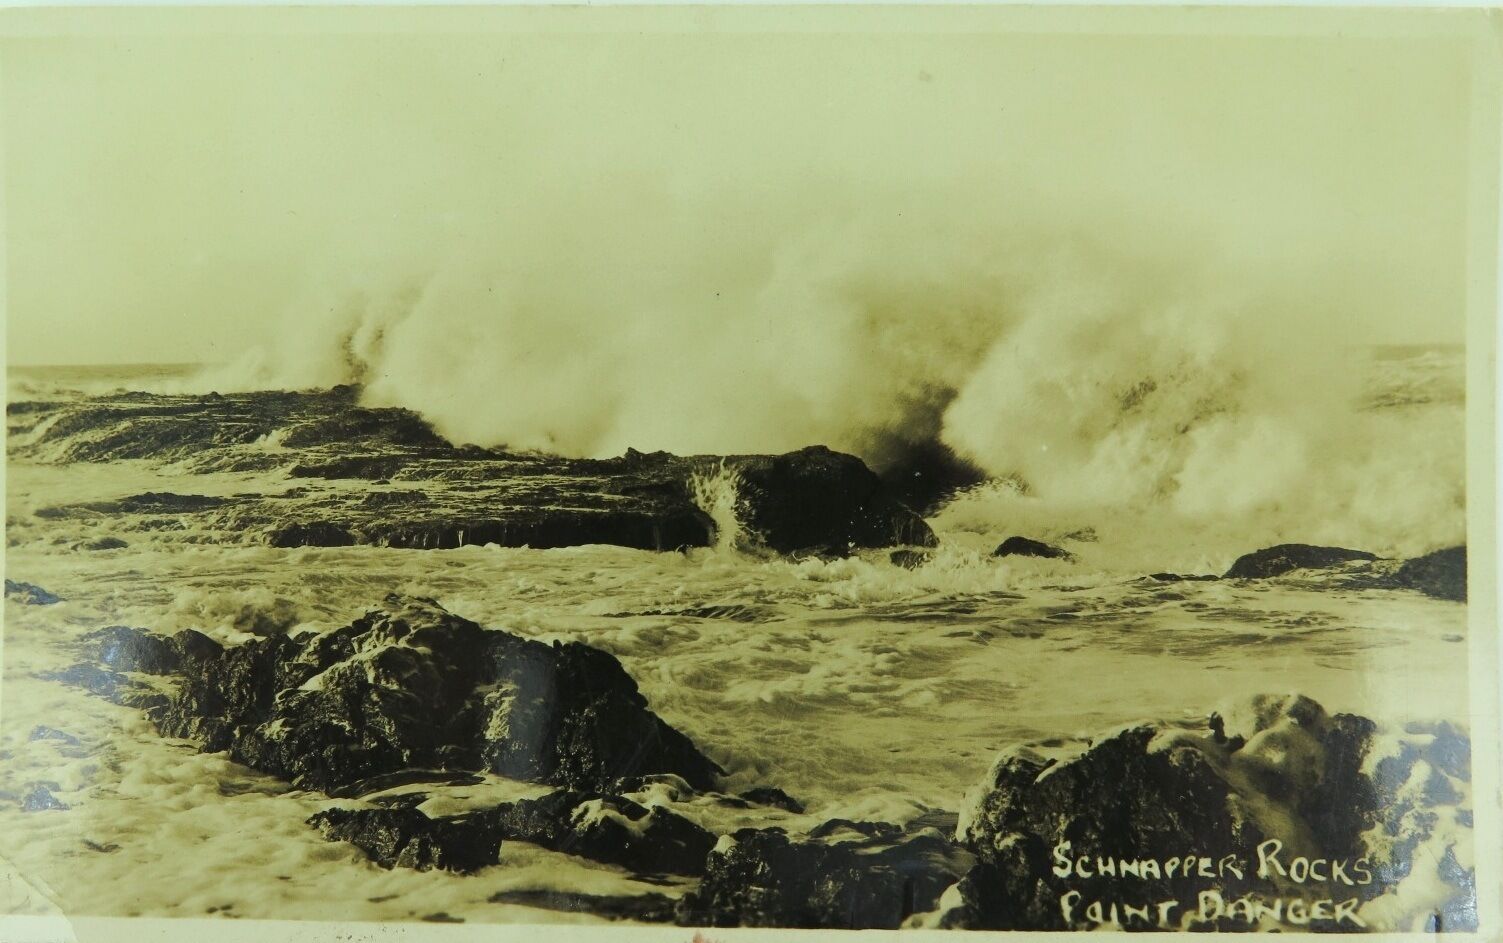 .POINT DANGER , SNAPPER (SCHNAPPER) ROCKS RARE EARLY 1900’S REAL PHOTO POSTCARD 